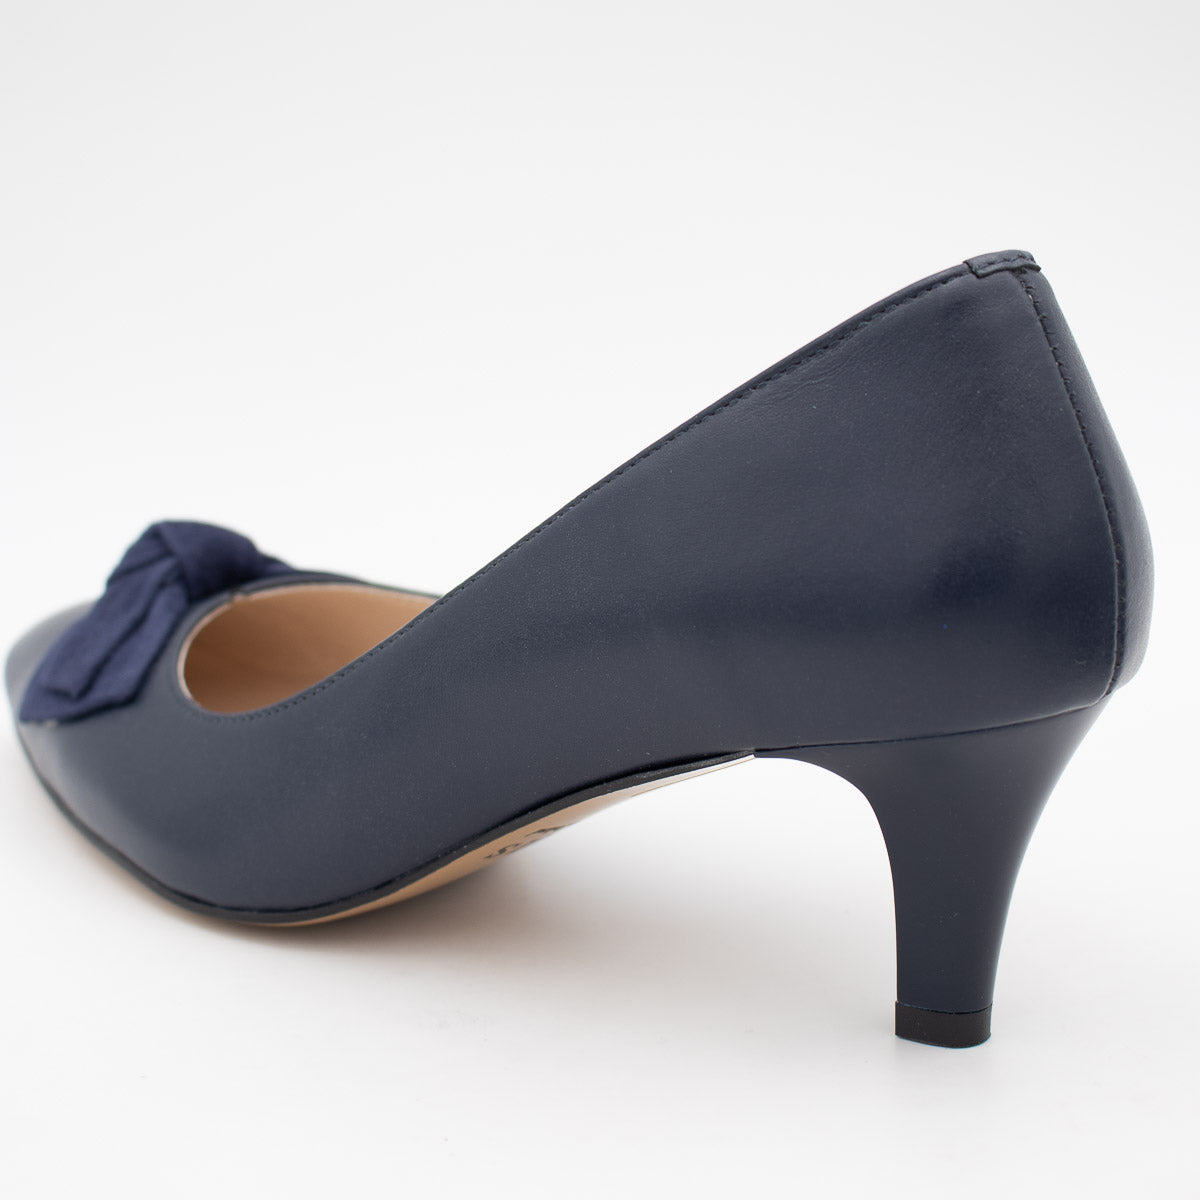 Navy Leather Low Heel with Folded Bow Detail